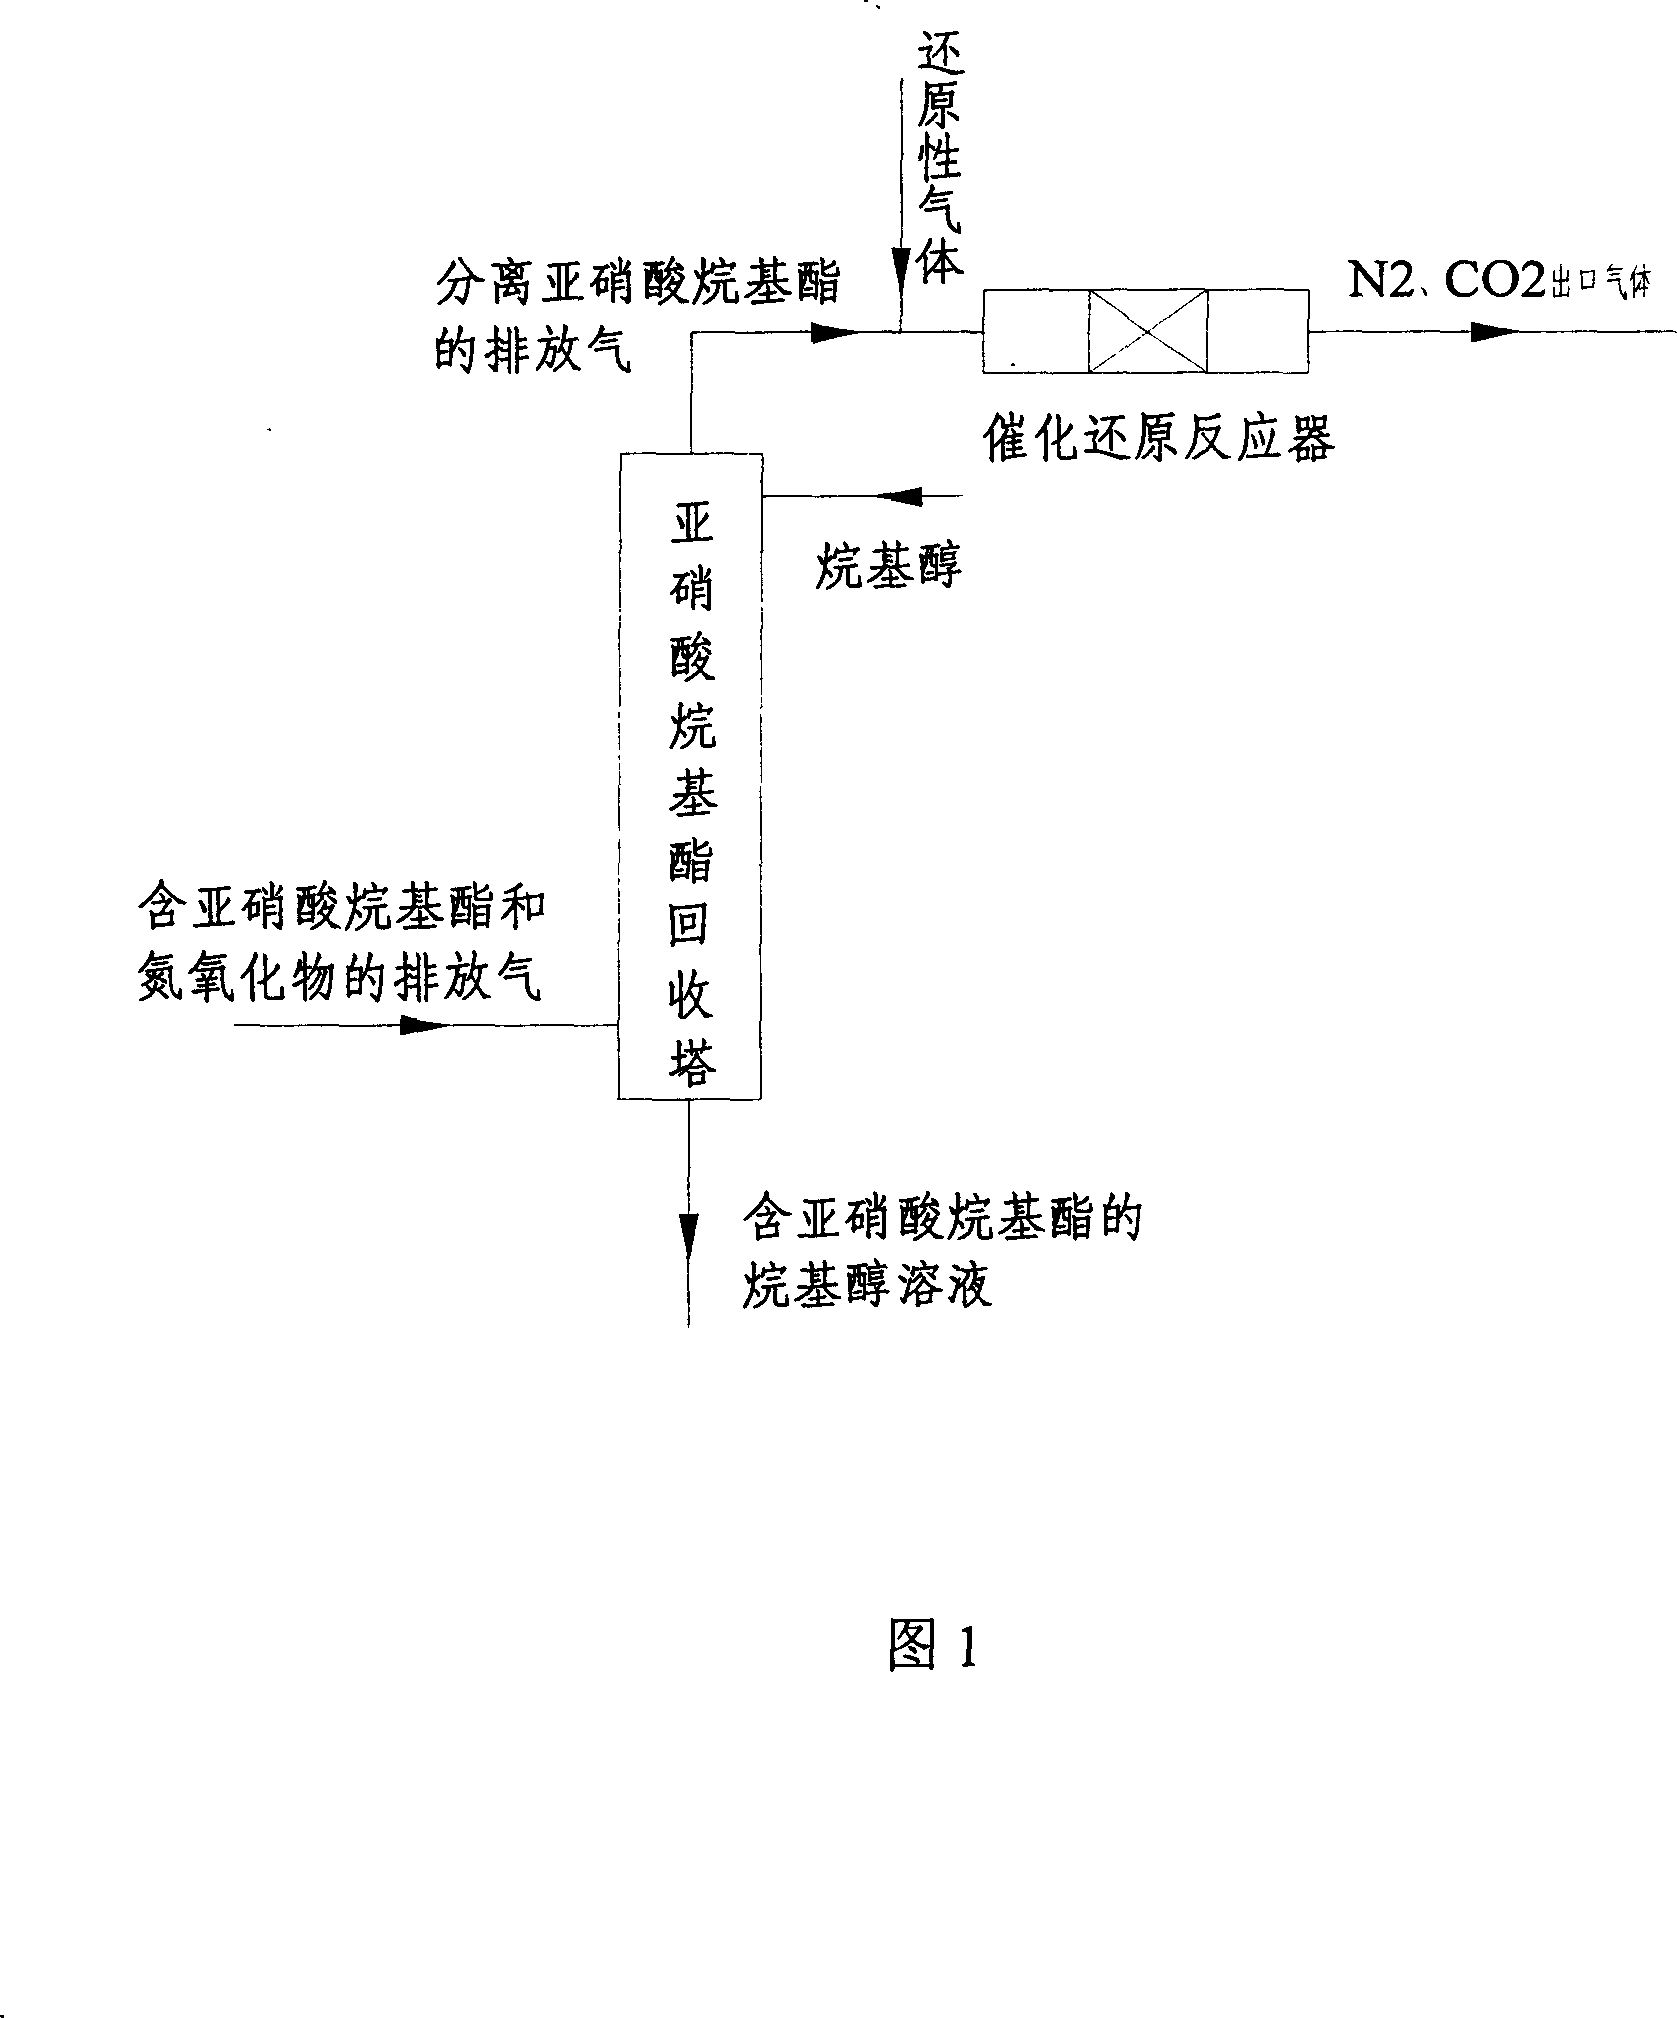 Method for expelling nitrous acid alkyl ester and nitrogen oxide gas from the  discharged gas